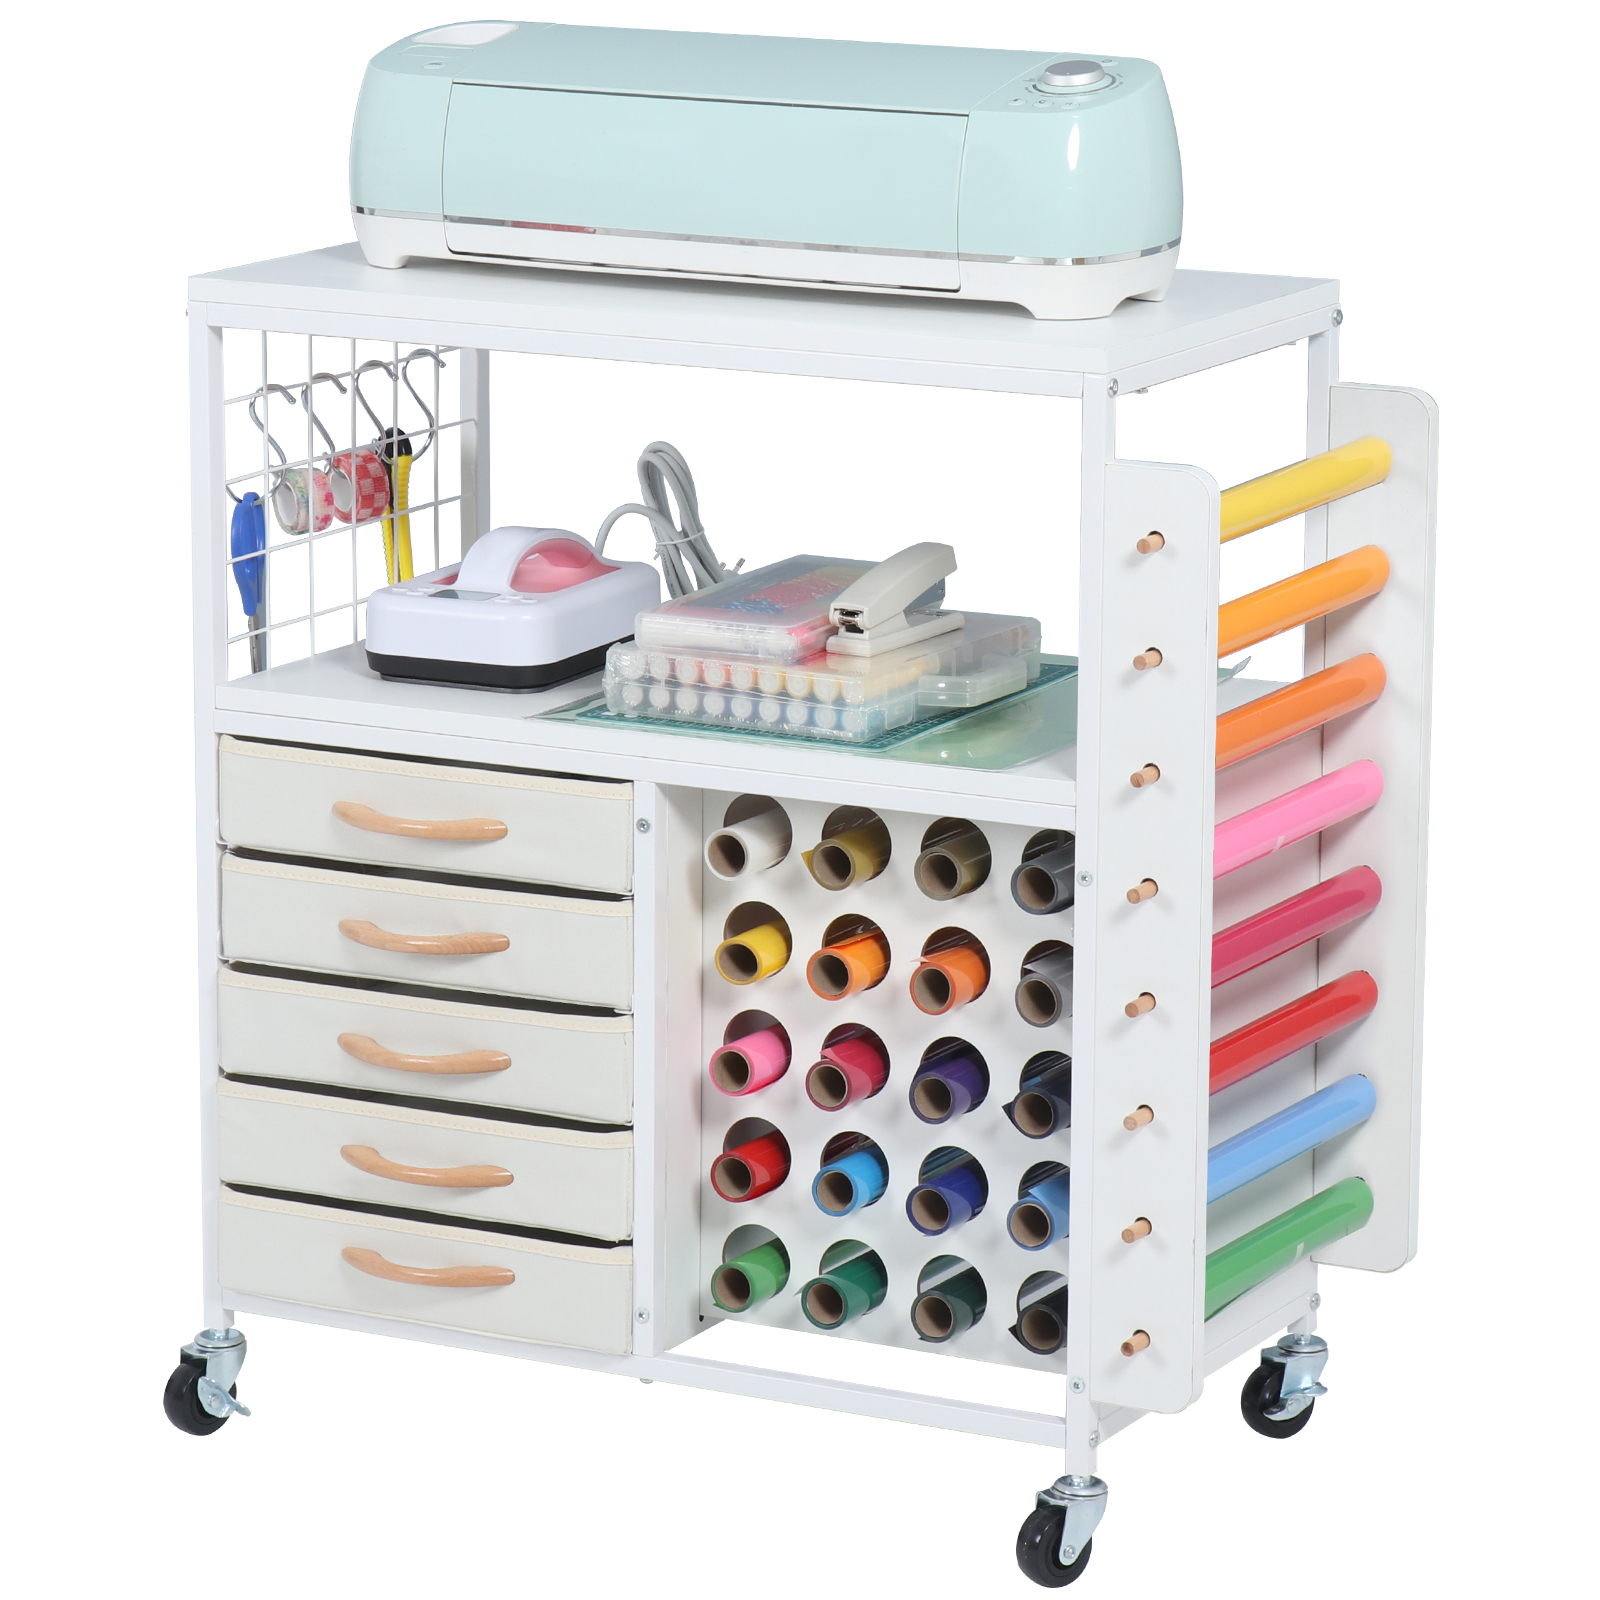 LUCKUP Organization and Storage Cart Compatible with Cricut Machines, Rolling Cart Cabinet with 28 Vinyl Roll Holders and 5 Drawers, Crafting Cabinet Table with Hooks for Craft Room Home